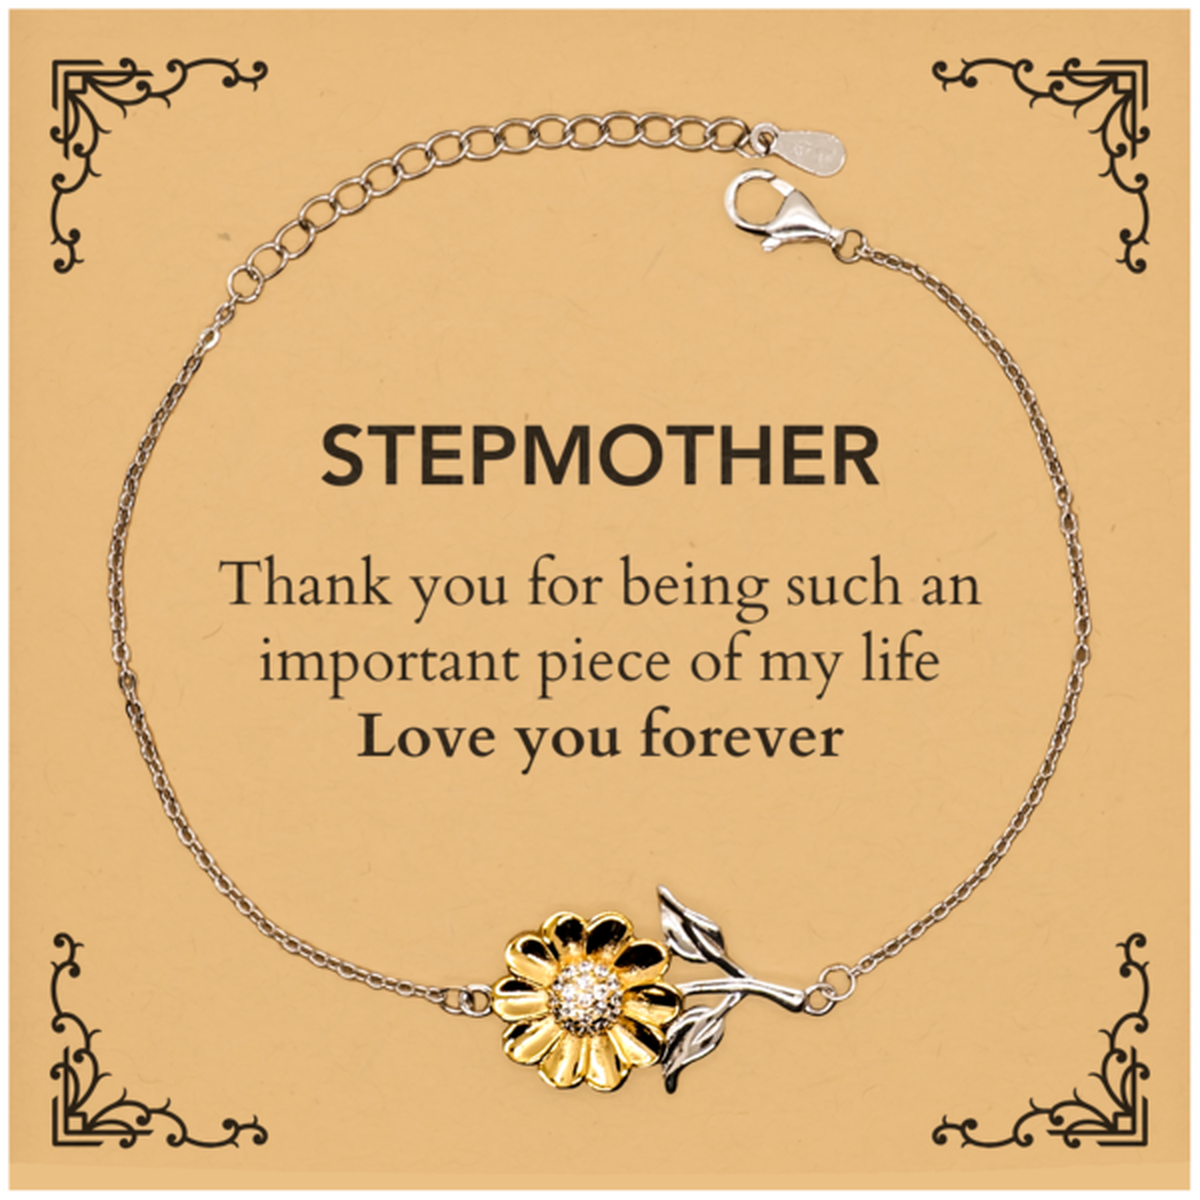 Appropriate Stepmother Sunflower Bracelet Epic Birthday Gifts for Stepmother Thank you for being such an important piece of my life Stepmother Christmas Mothers Fathers Day